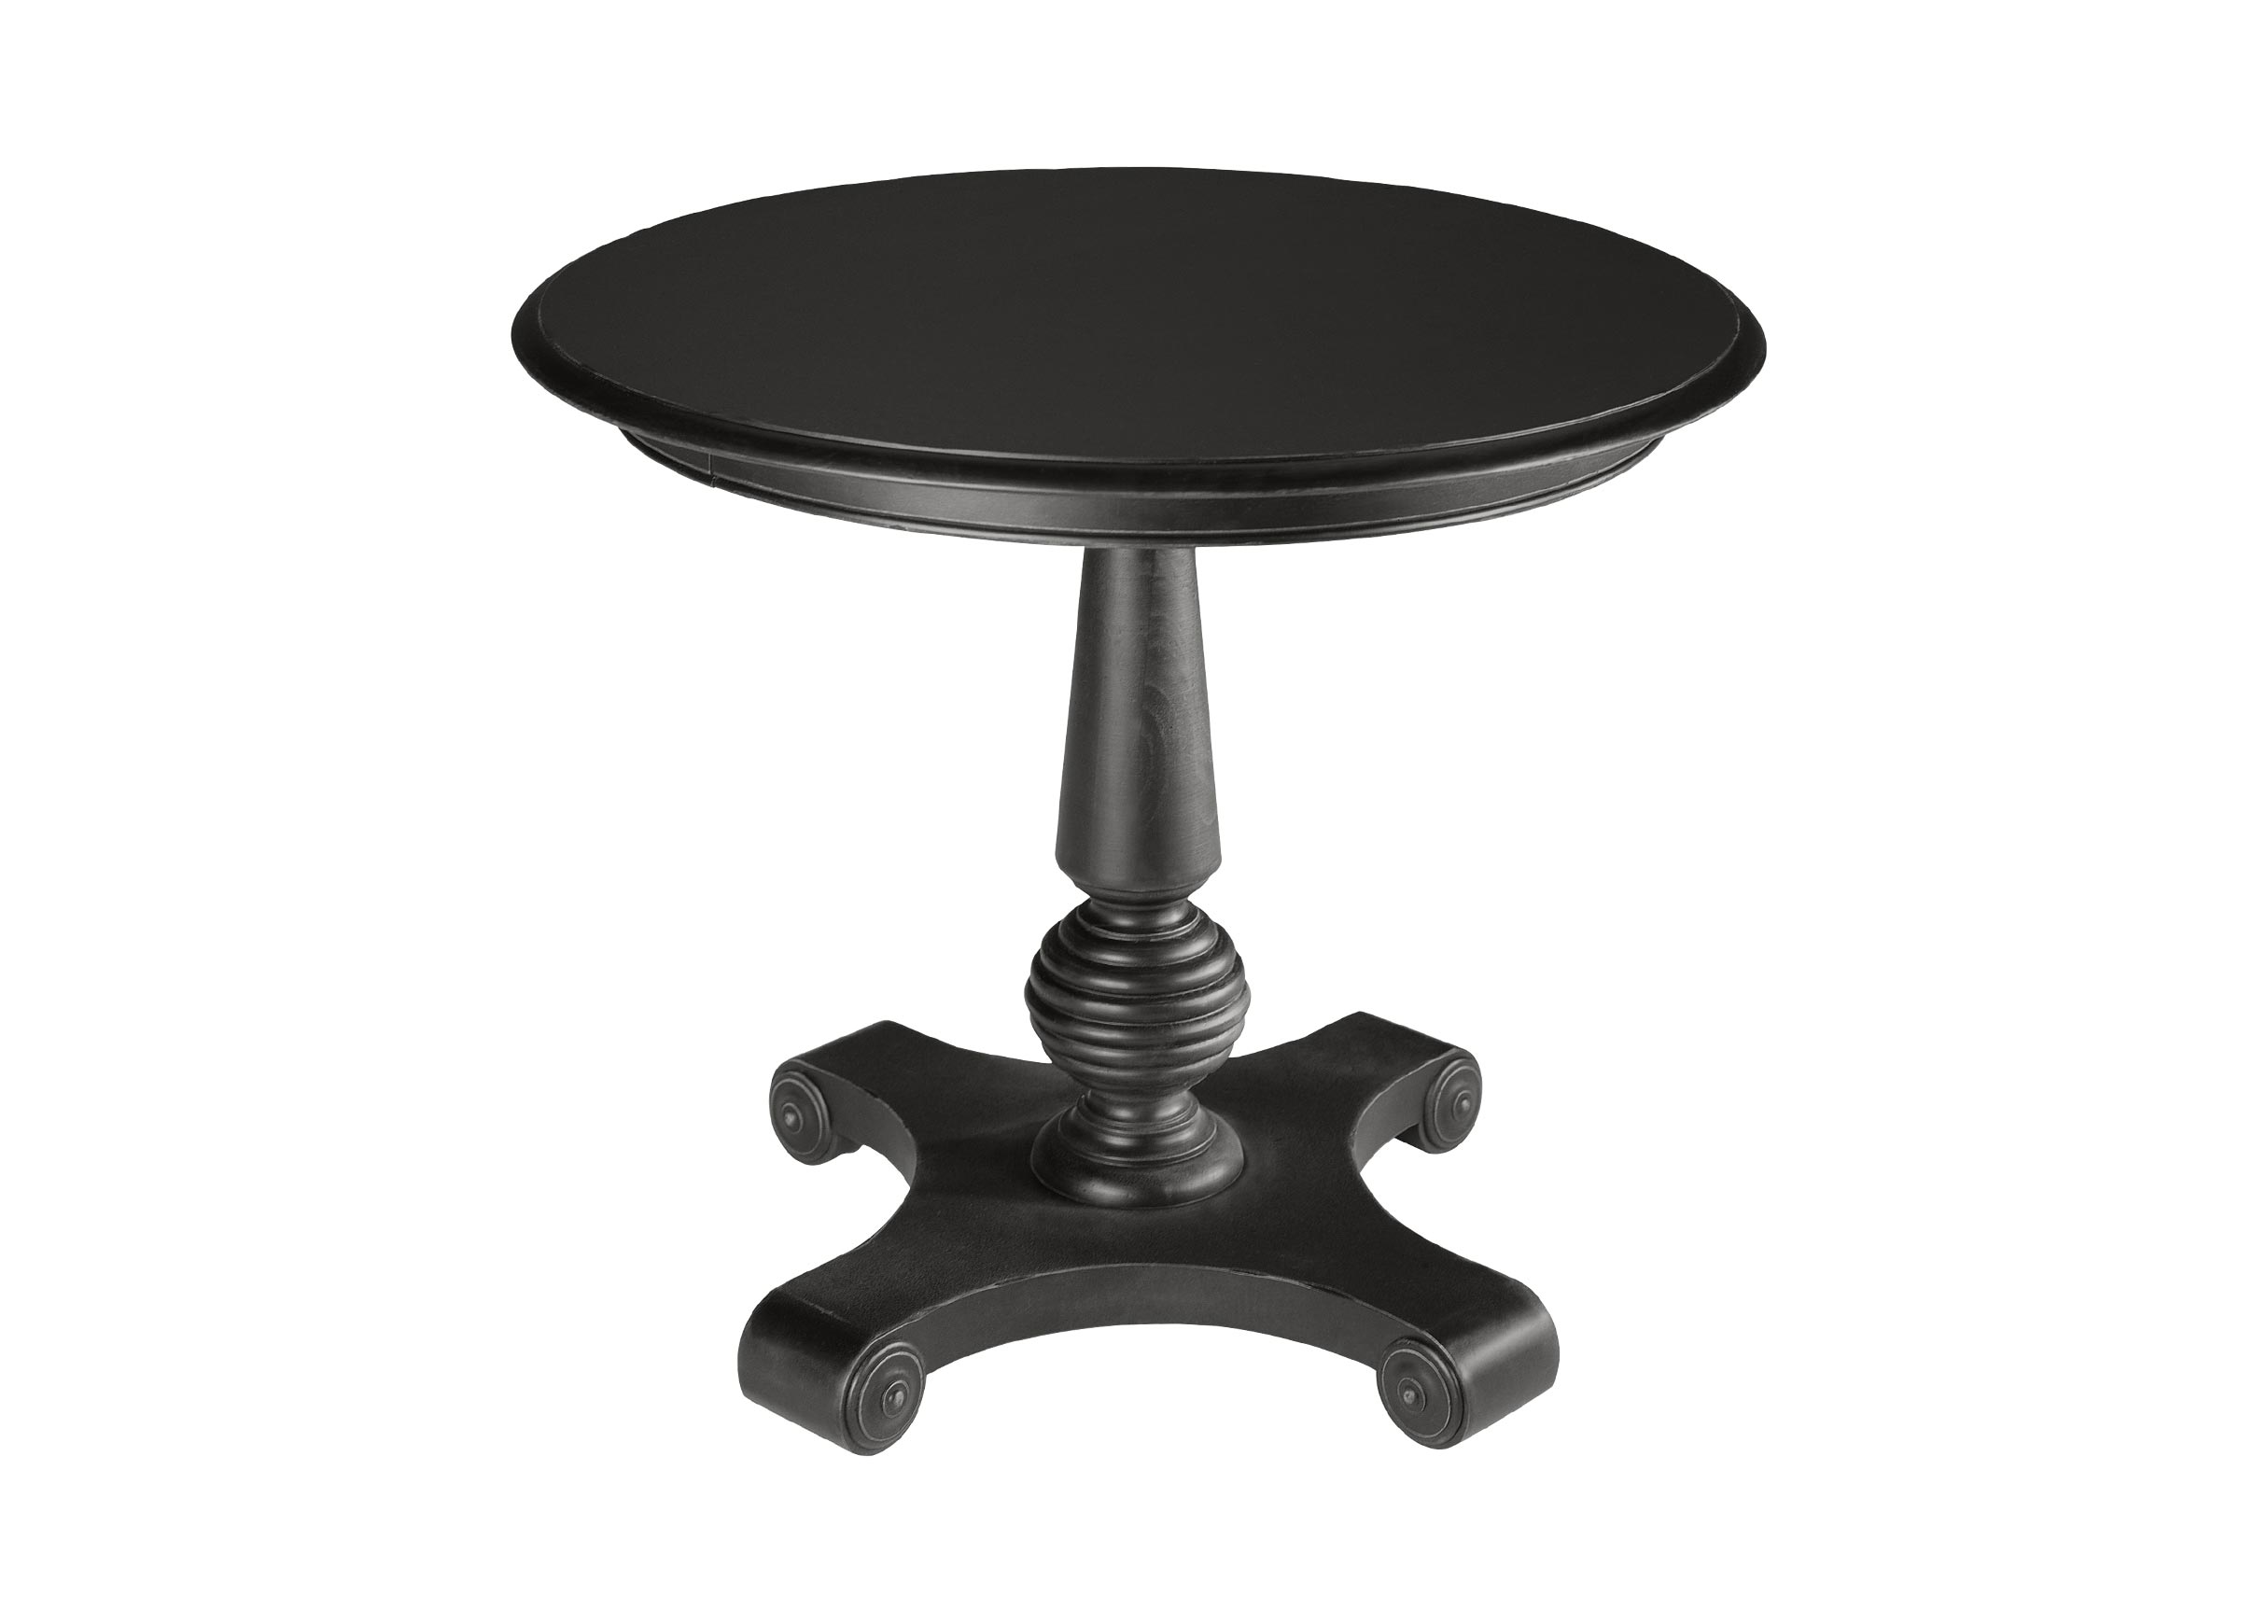 tanner pedestal table side tables ethan allen distressed round black accent seattle lighting bellevue glass top coffee with brass legs antique oval mimosa outdoor furniture